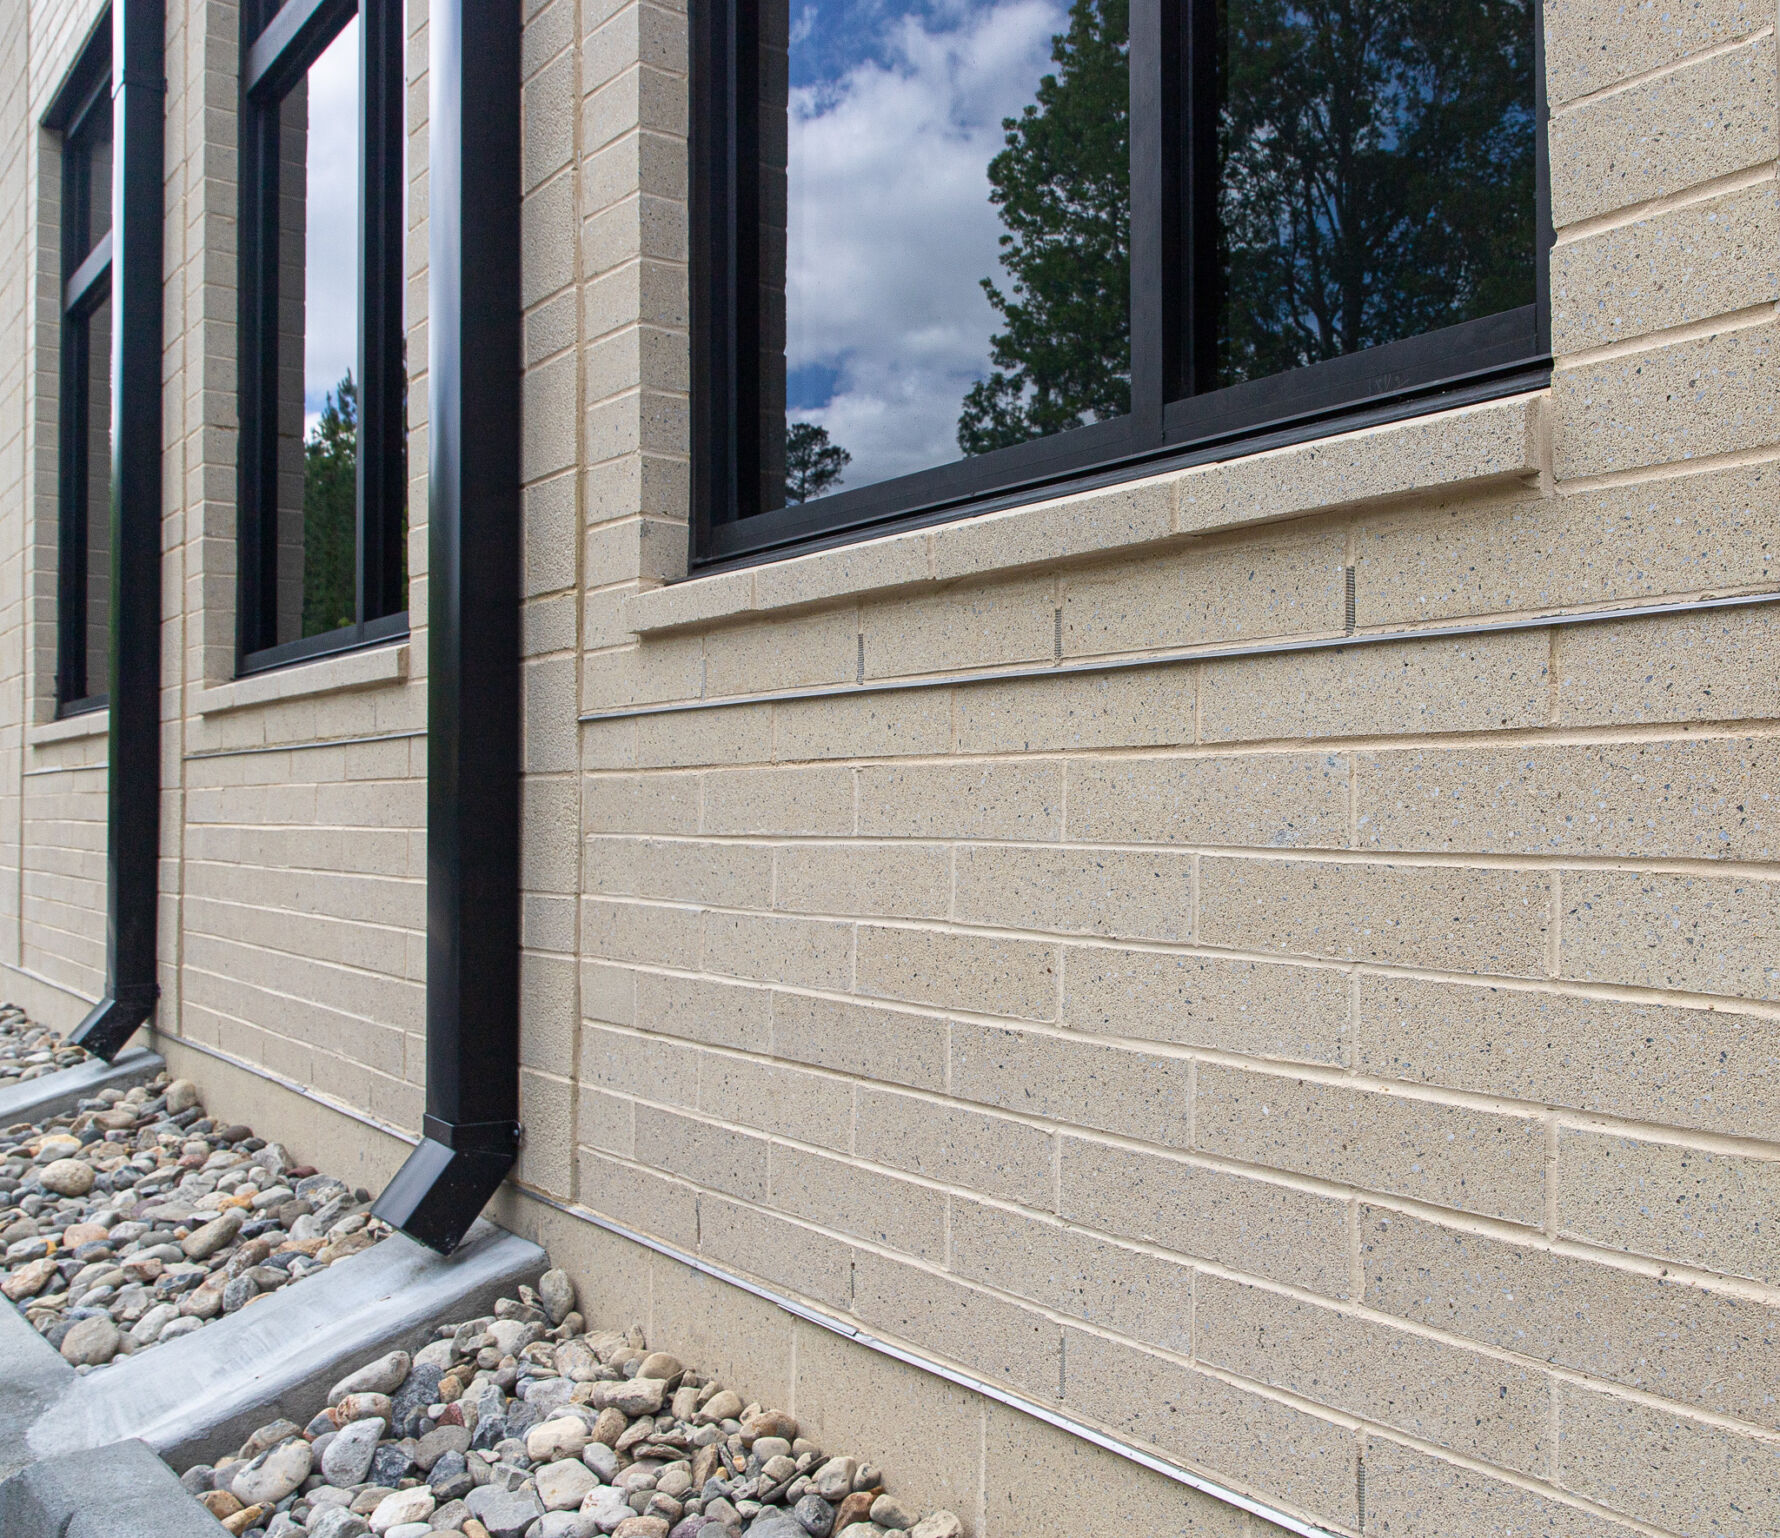 Johnson Concrete Products Prestige Masonry Architectural Block - Polished Face Finish and Weathered Face Finish in Cave of Crystals, Gray Block, CMU